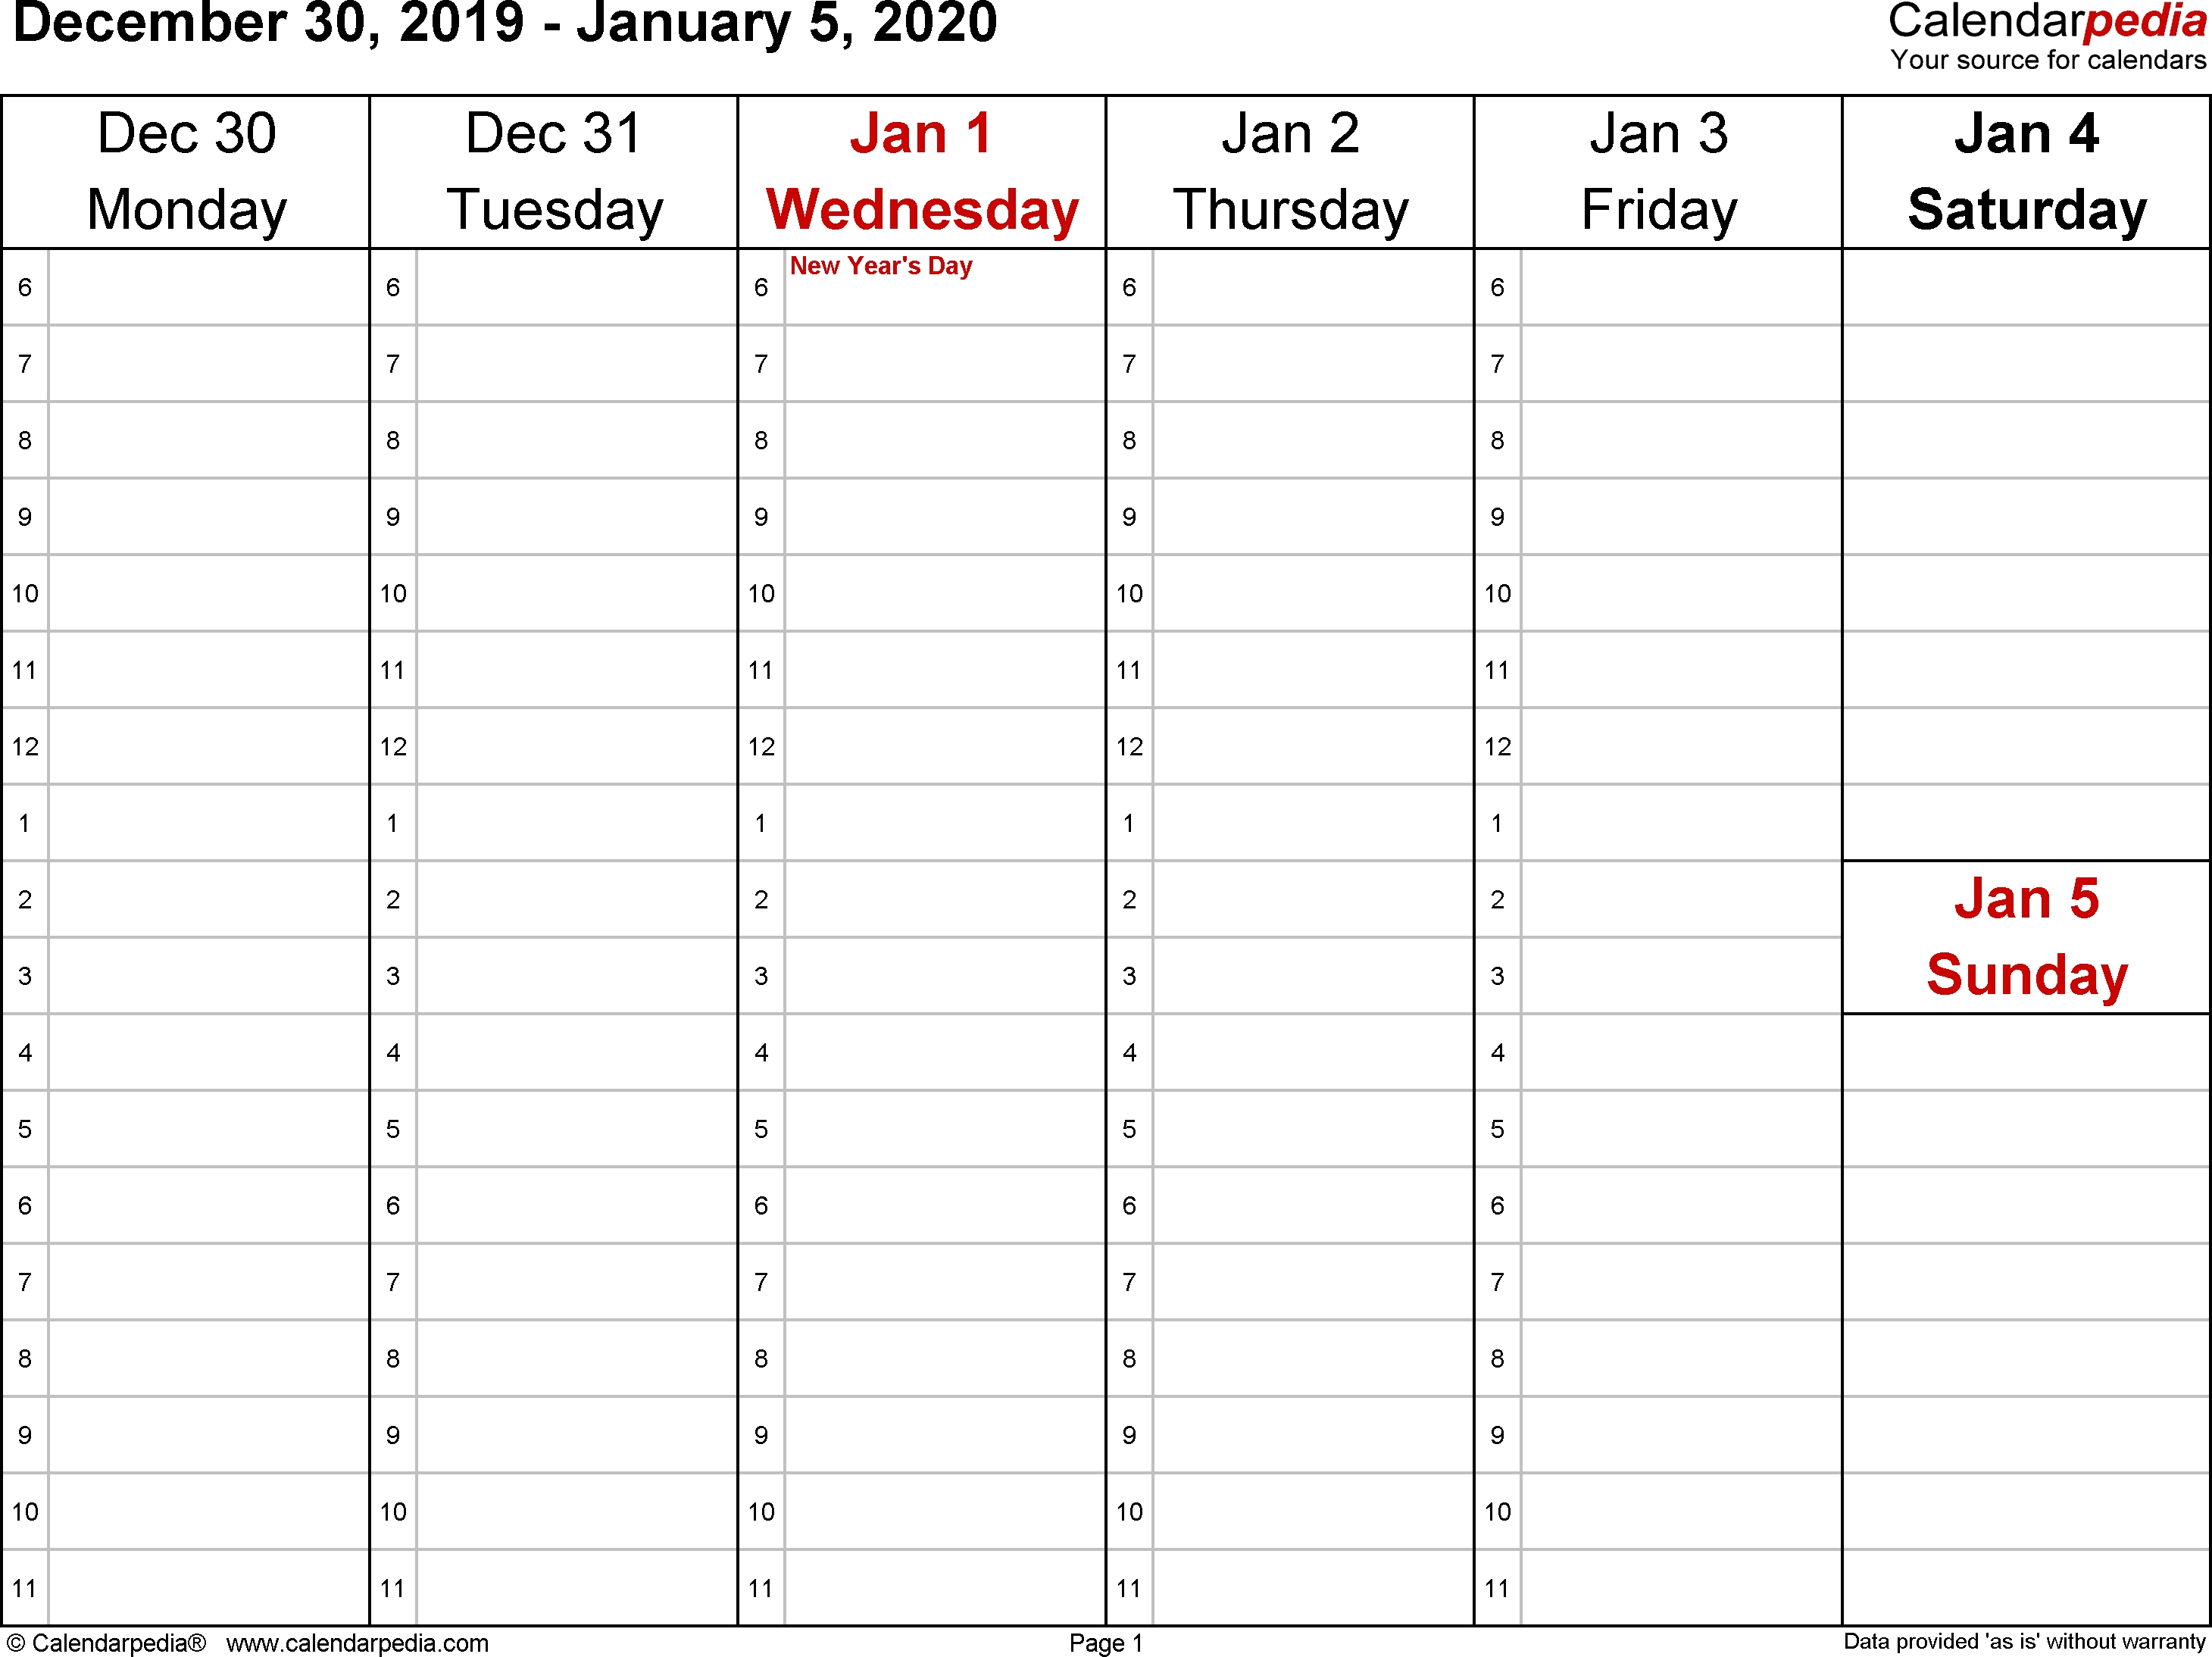 Weekly Calendar 2020 For Word - 12 Free Printable Templates-Hourly Calendar Template 2020